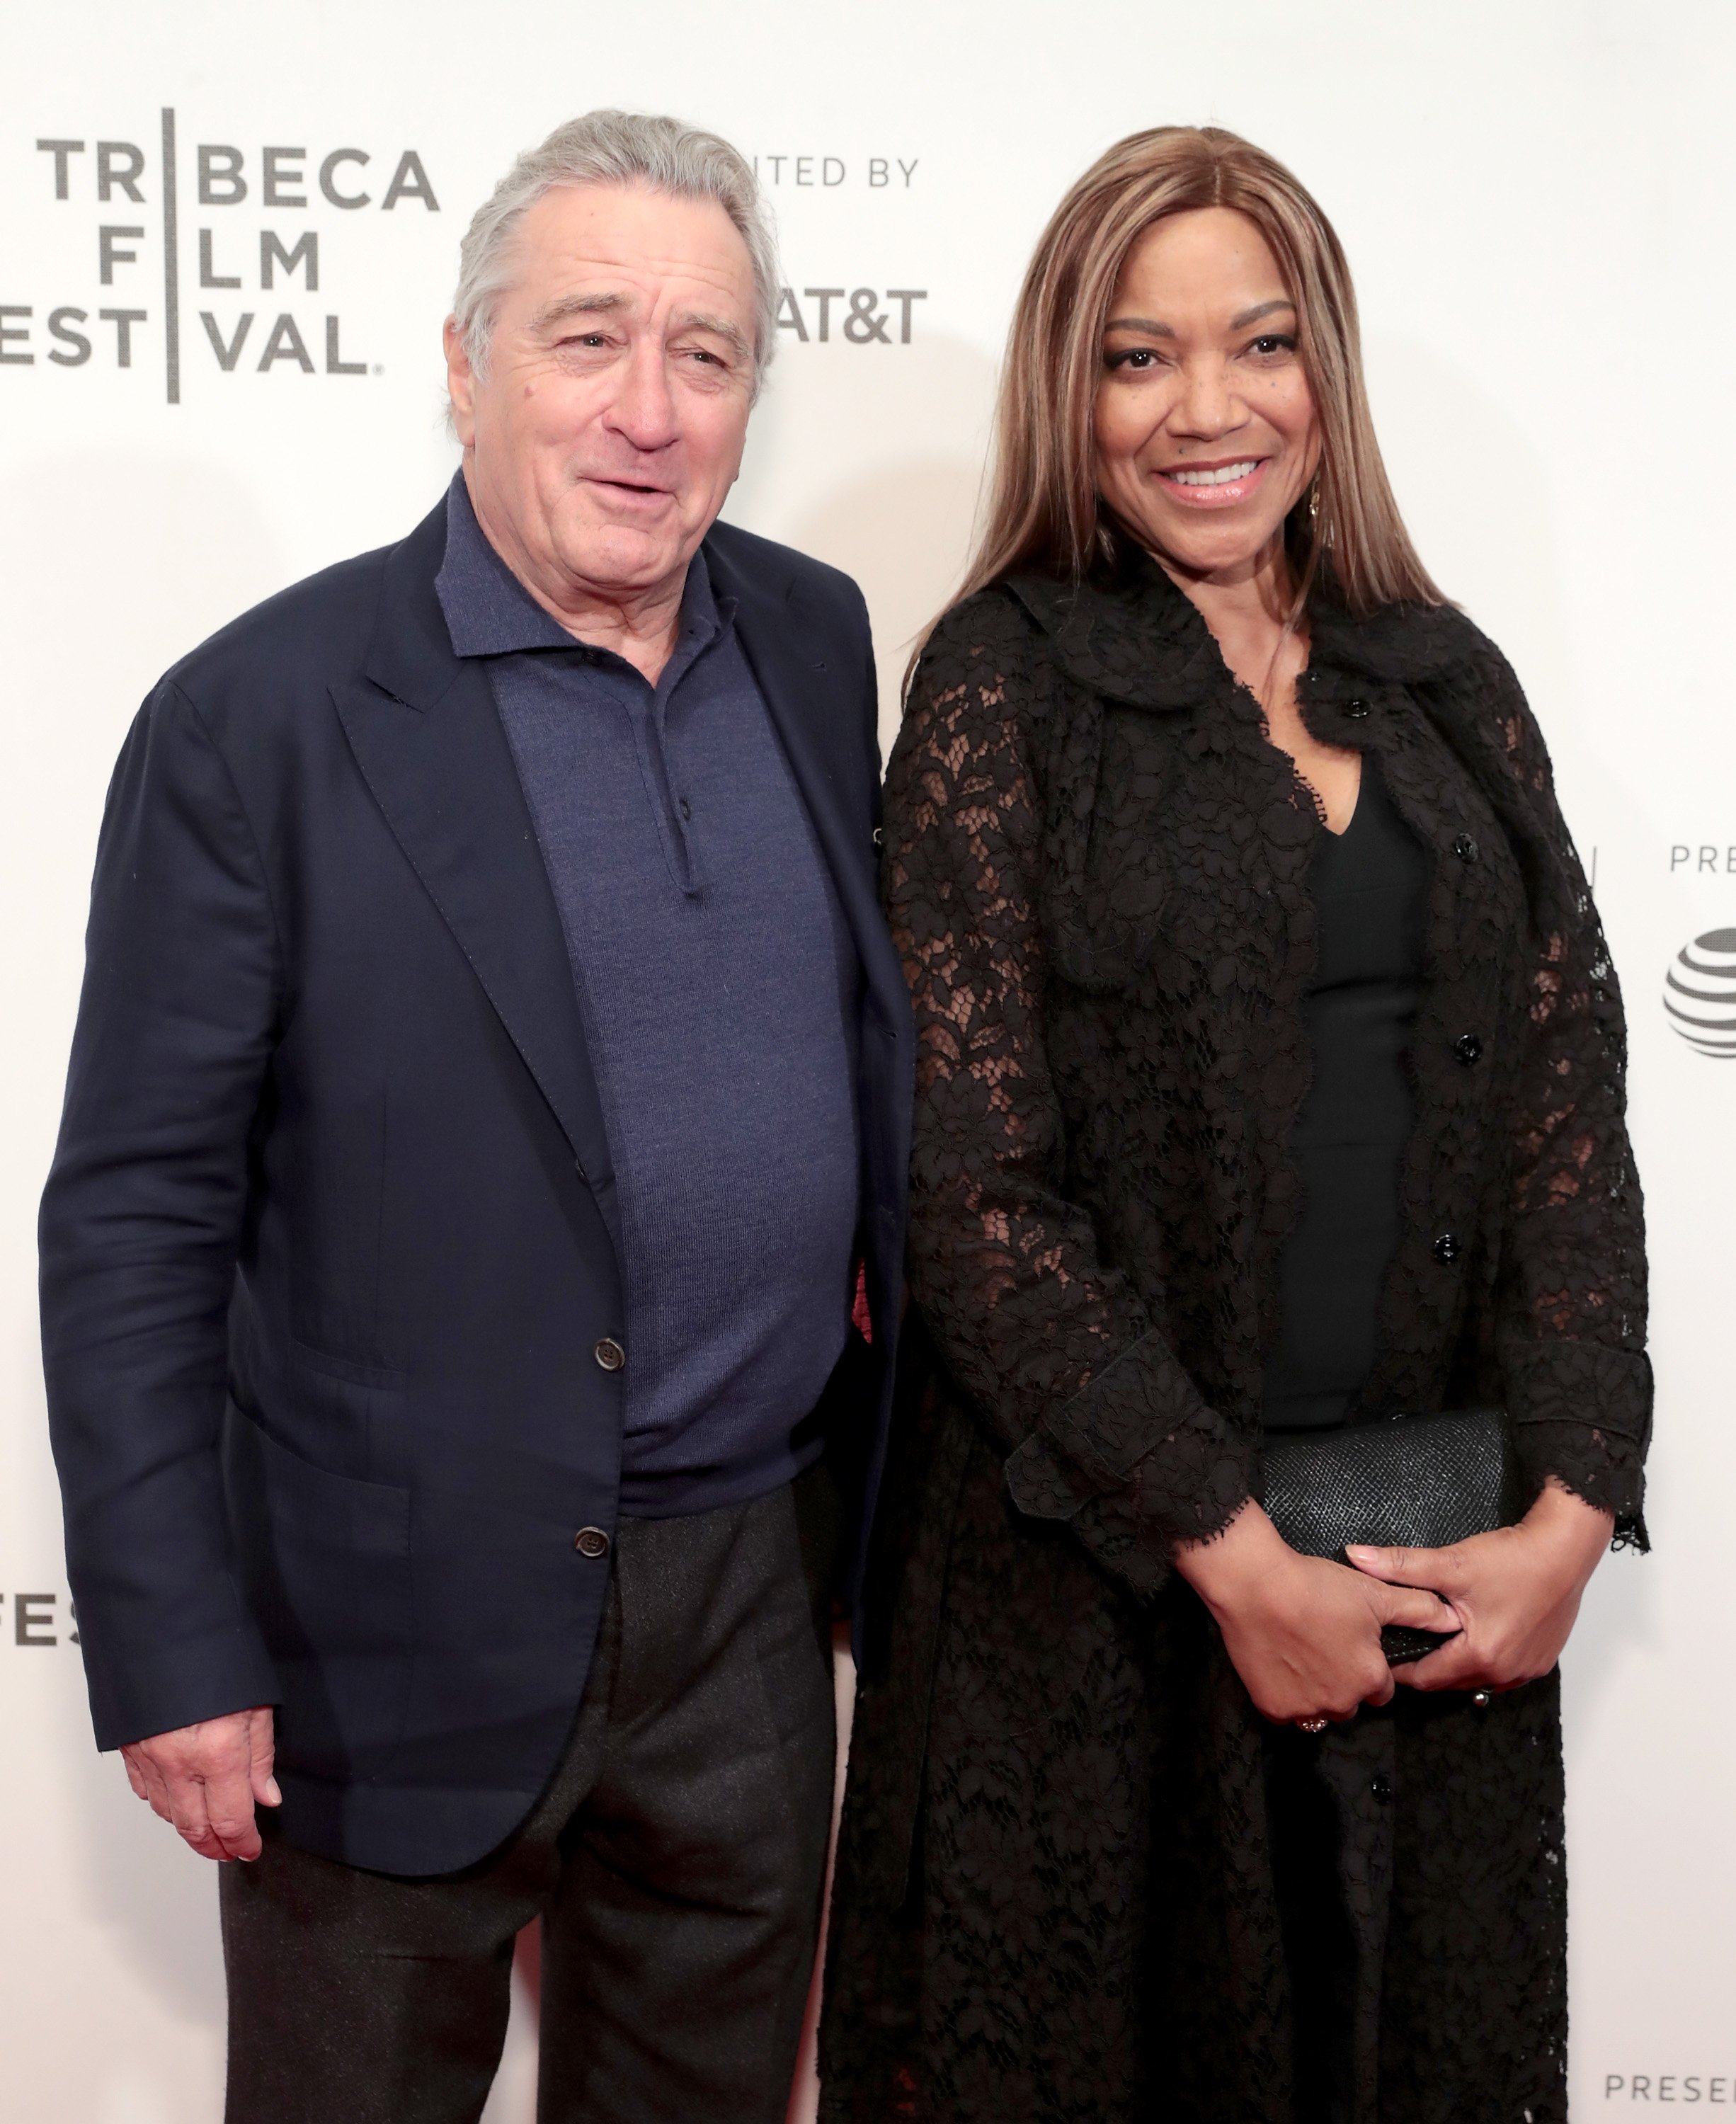 Robert De Niro and Grace Hightower attend Showtime's World Premiere of The Fourth Estate on April 28, 2018, in New York City. | Source: Getty Images.